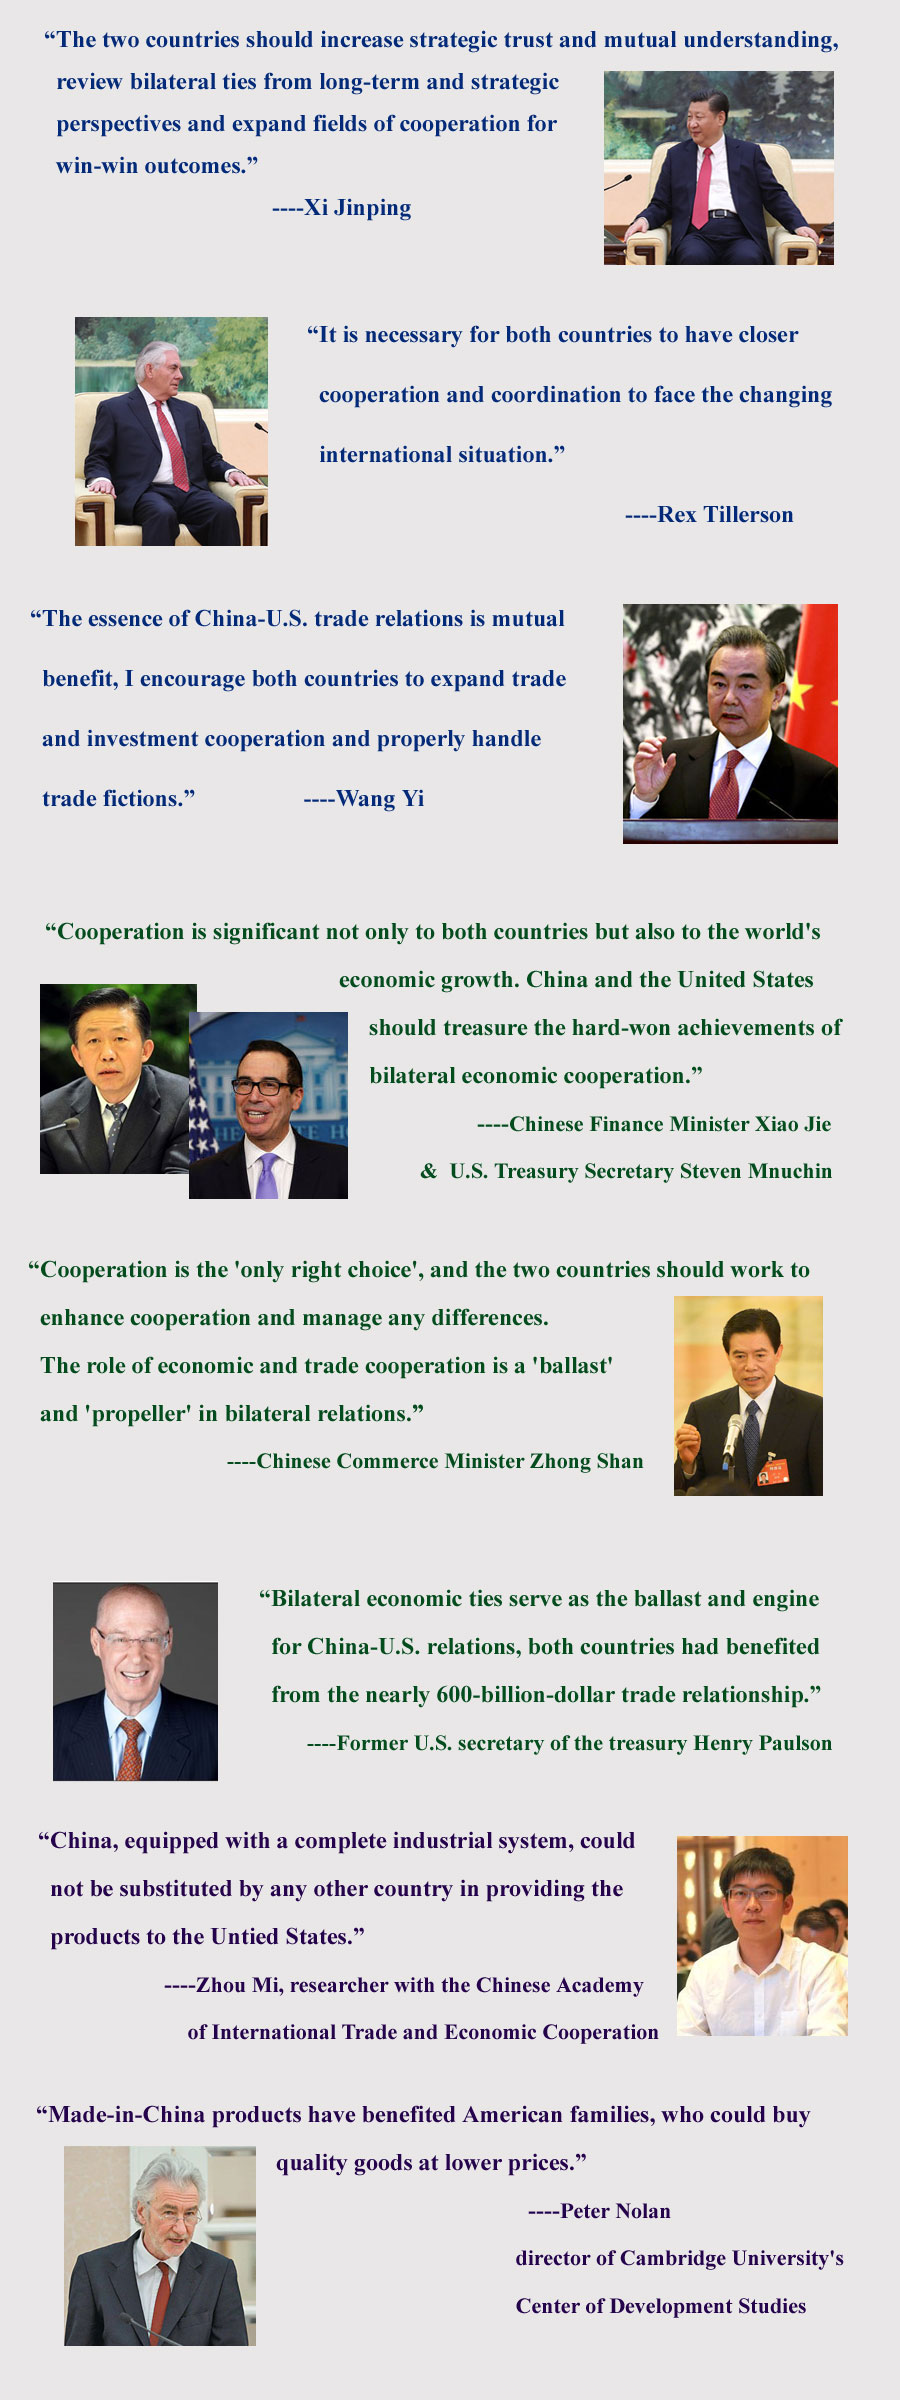 Win-win China-U.S. relations on economy and trade